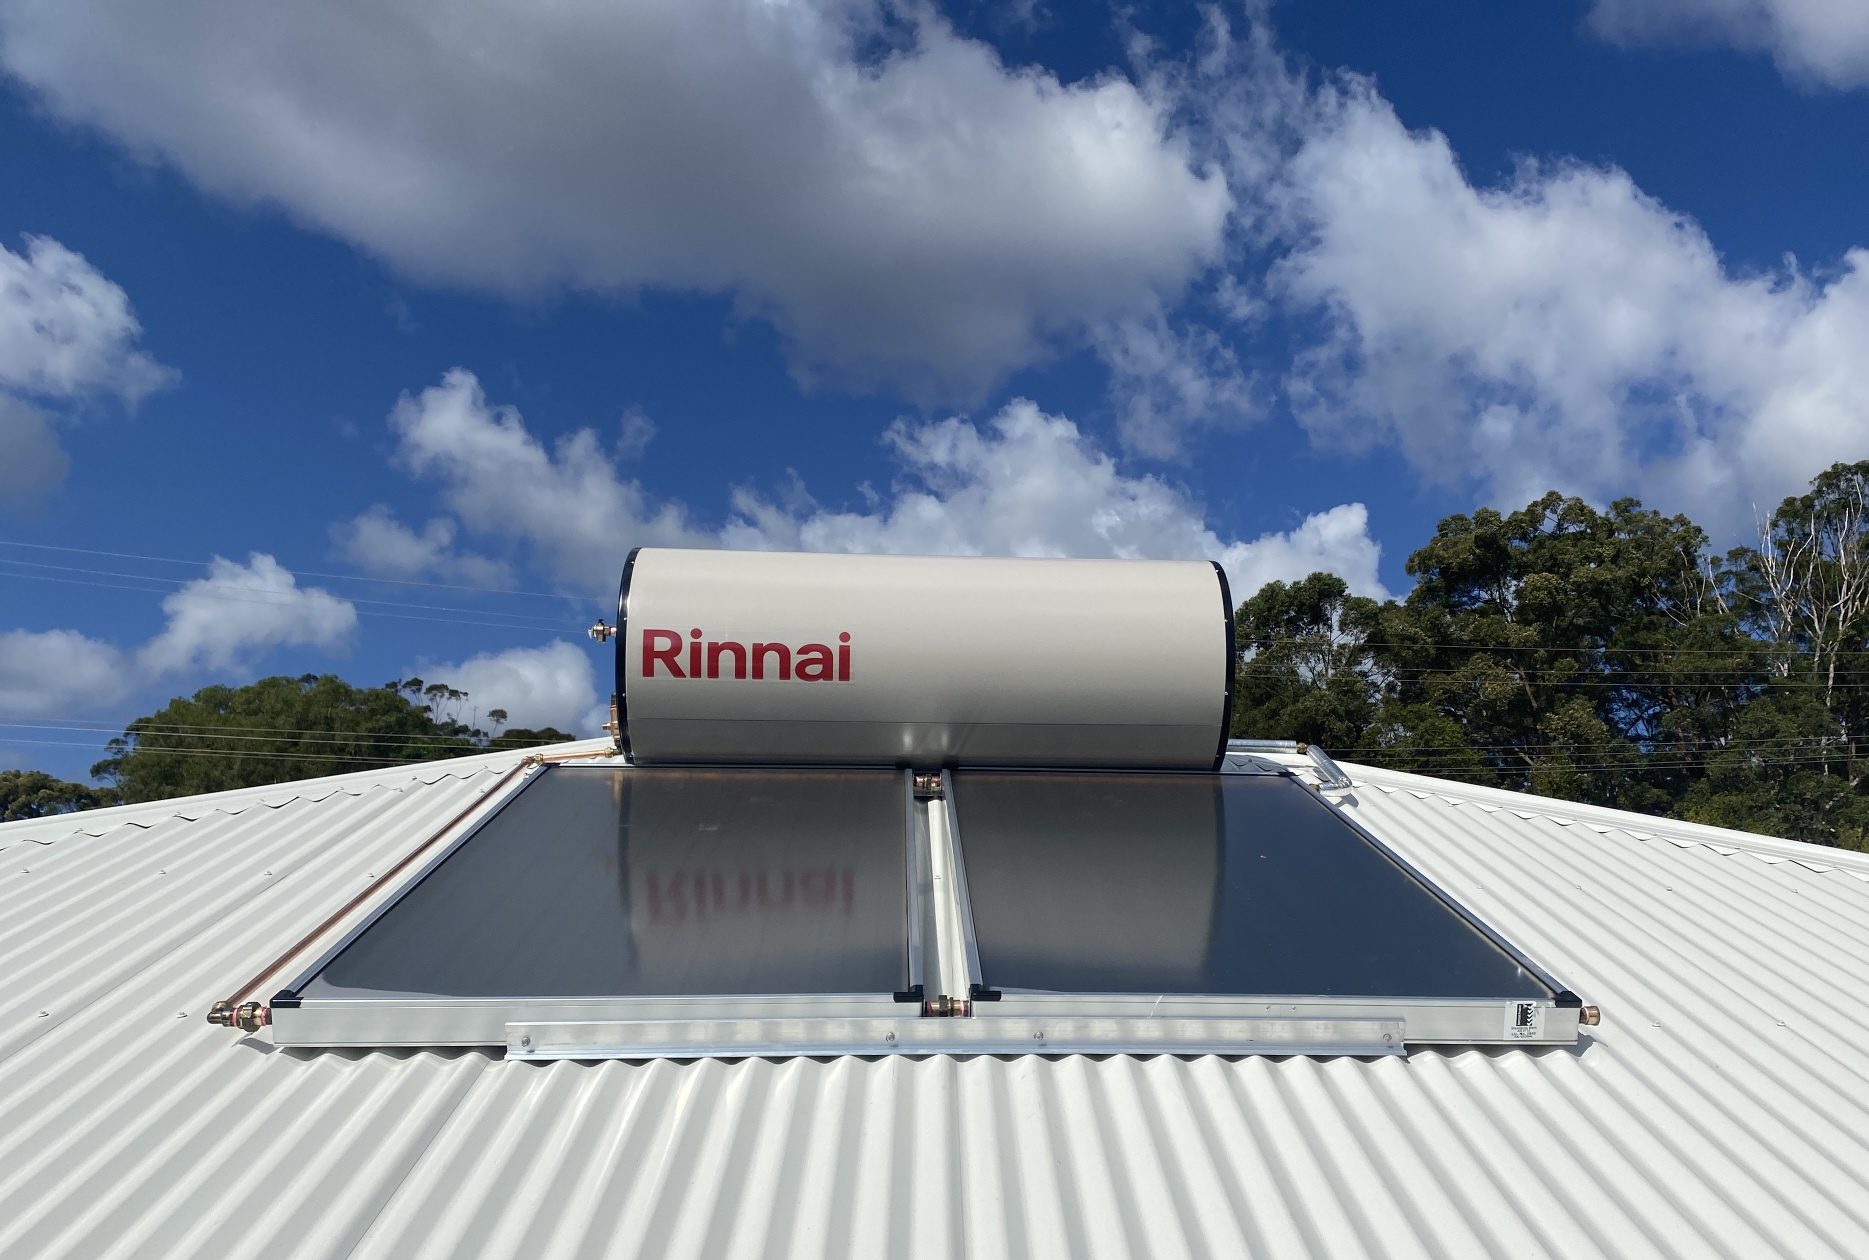 Rinnai solar hot water system getting craned onto roof for new build